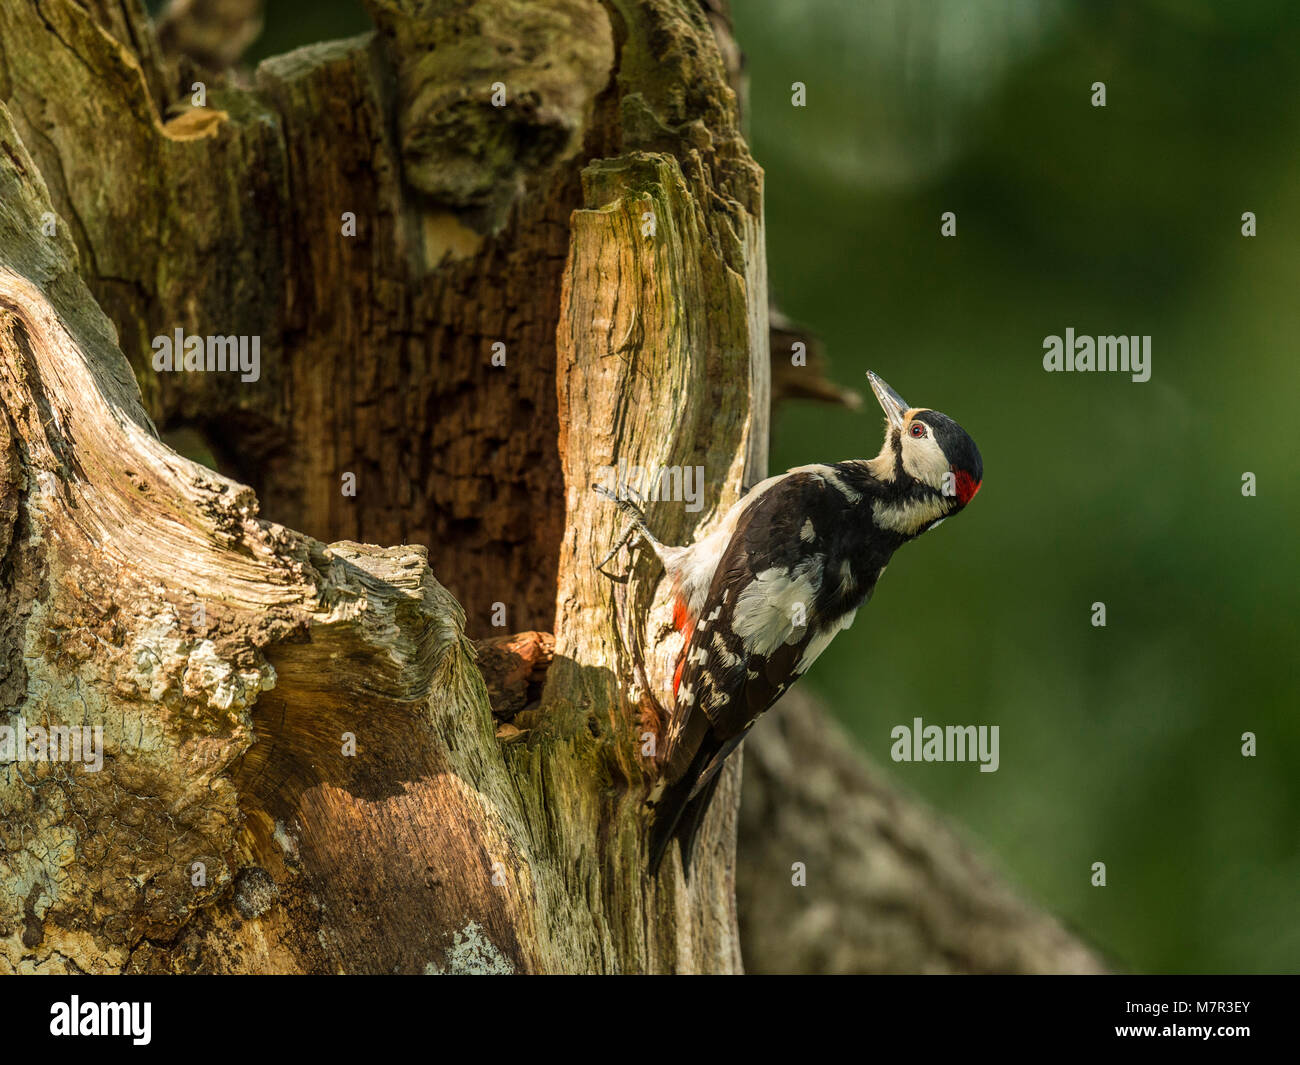 Great Spotted Woodpecker (Dendrocopos major) on tree trunk, bathed in golden sunlight. Stock Photo